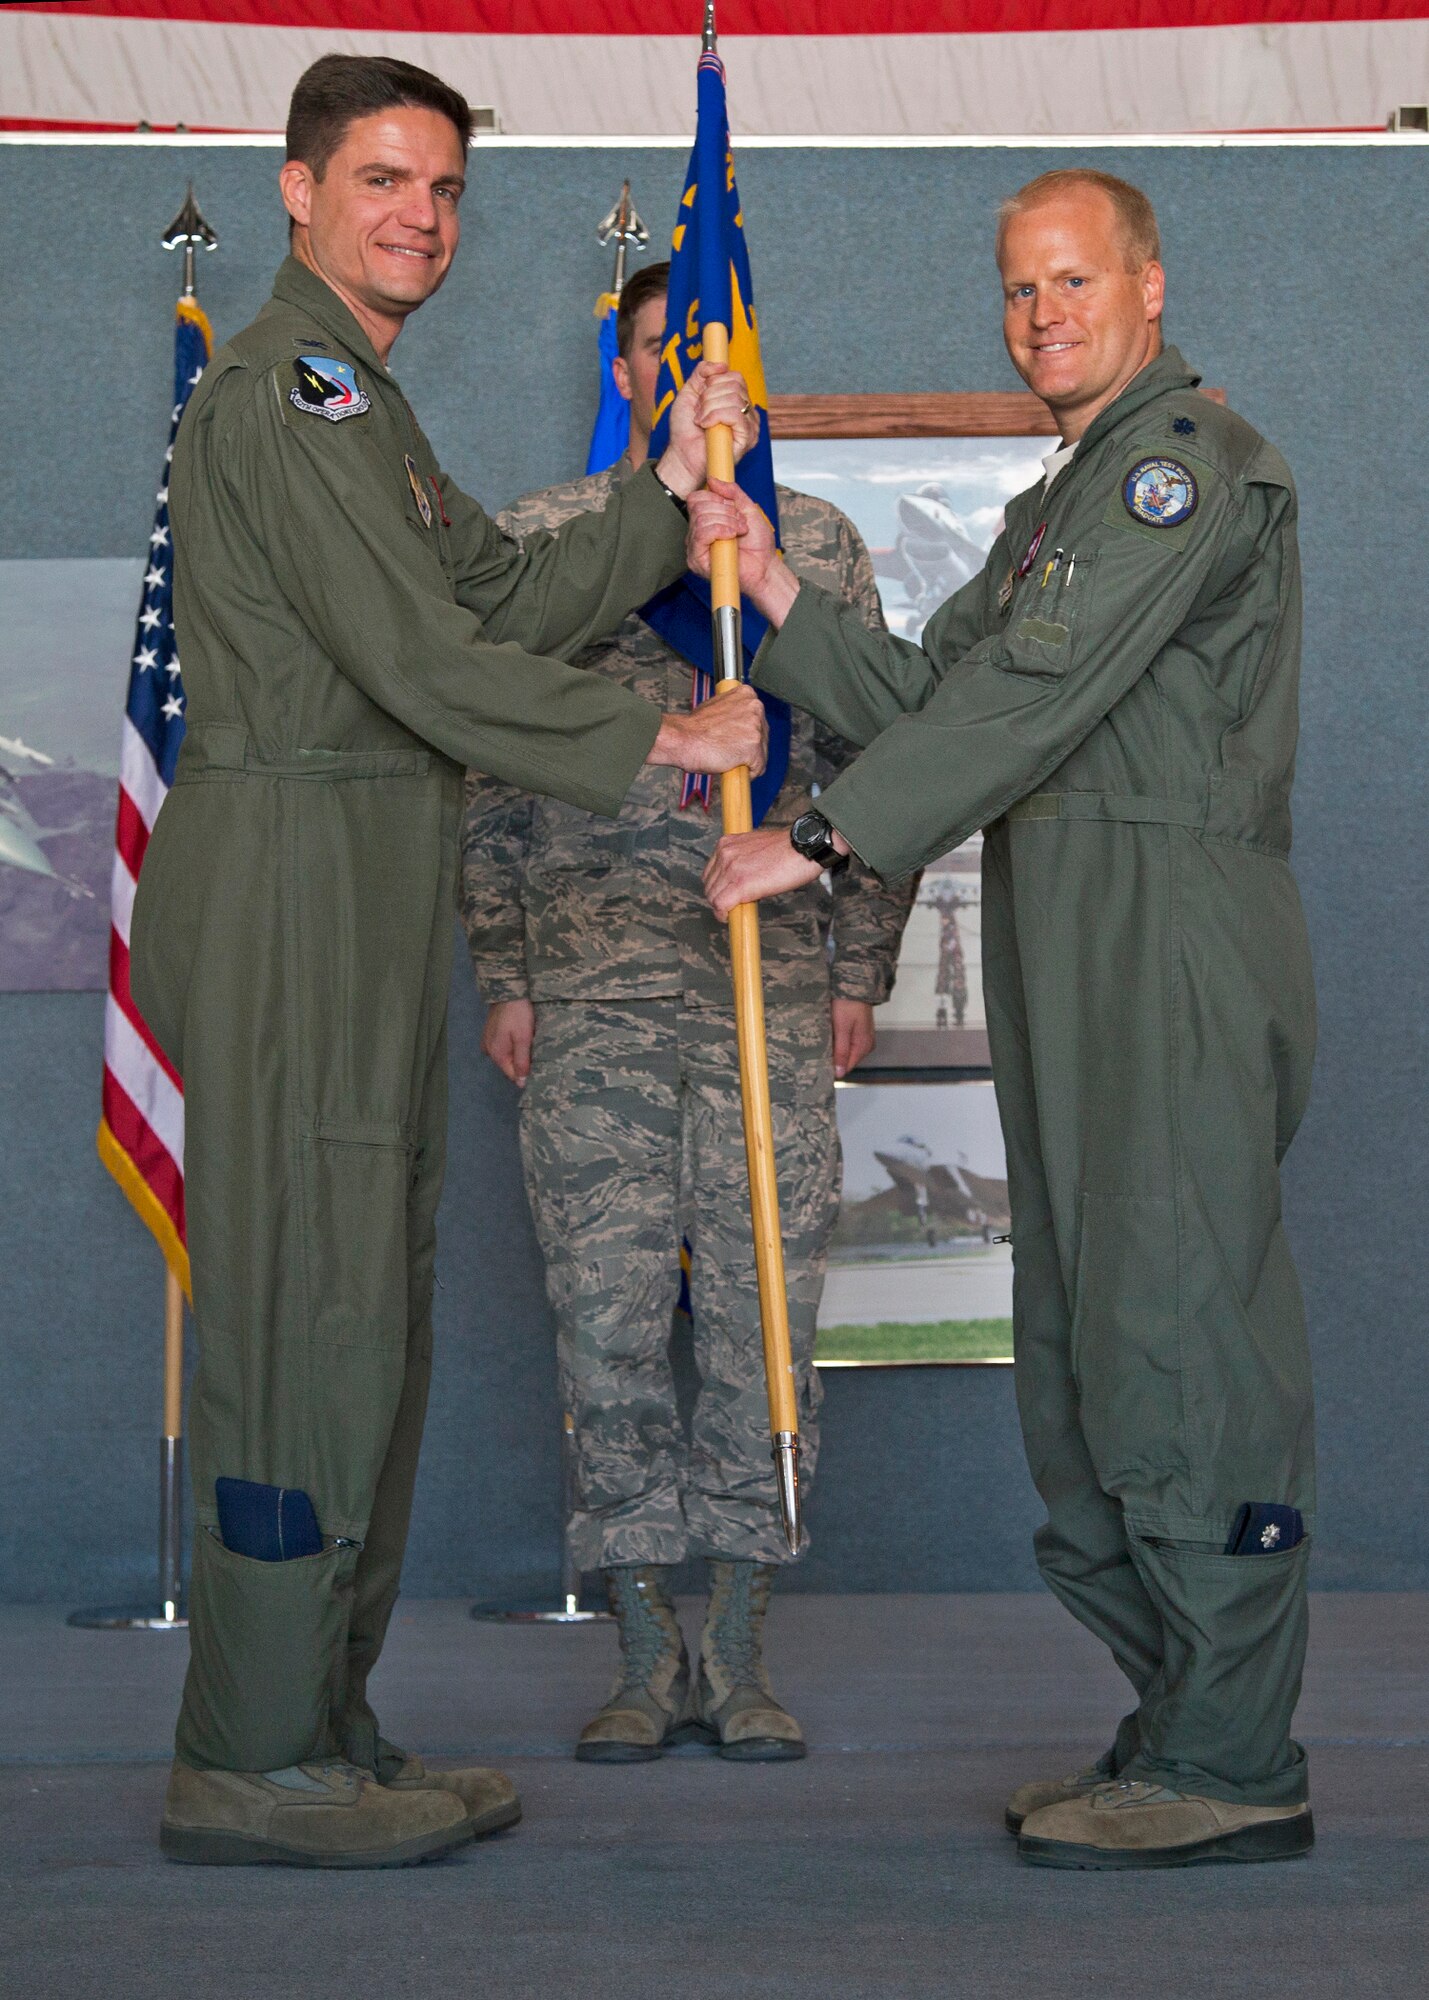 Col. Rodney Todaro (left), 412th Operations Group commander, passes the 416th Flight Test Squadron guidon to Lt. Col. Darren Wees who assumed command of the 416th FLTS May 5 at Hangar 1630E. (U.S. Air Force photo by Christian Turner)